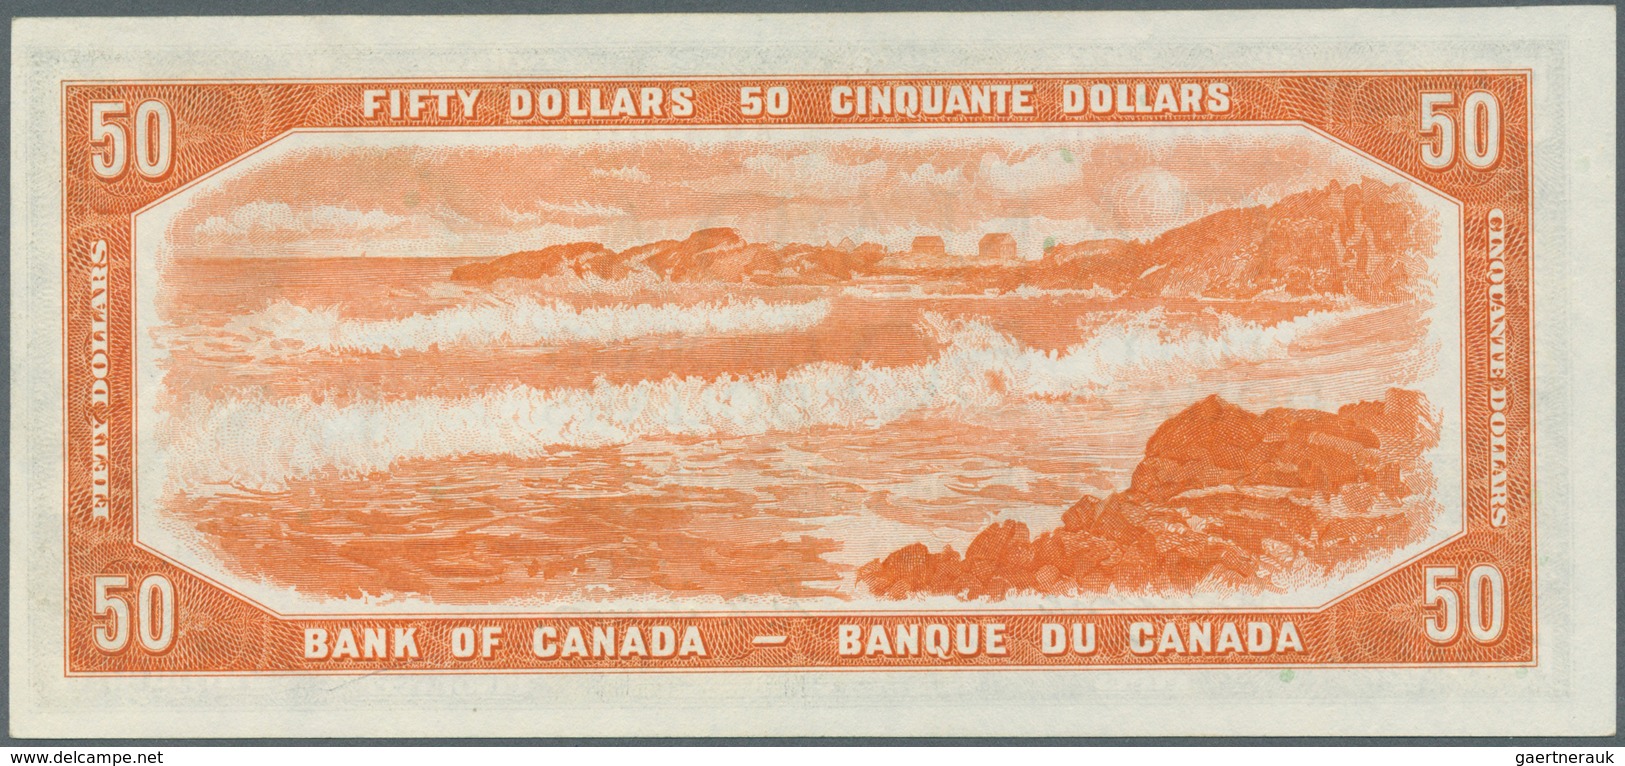 Canada: 50 Dollars 1954 "Devil's Face Hair Style" Issue With Signature Coyne & Towers, P.71a, Highly - Kanada